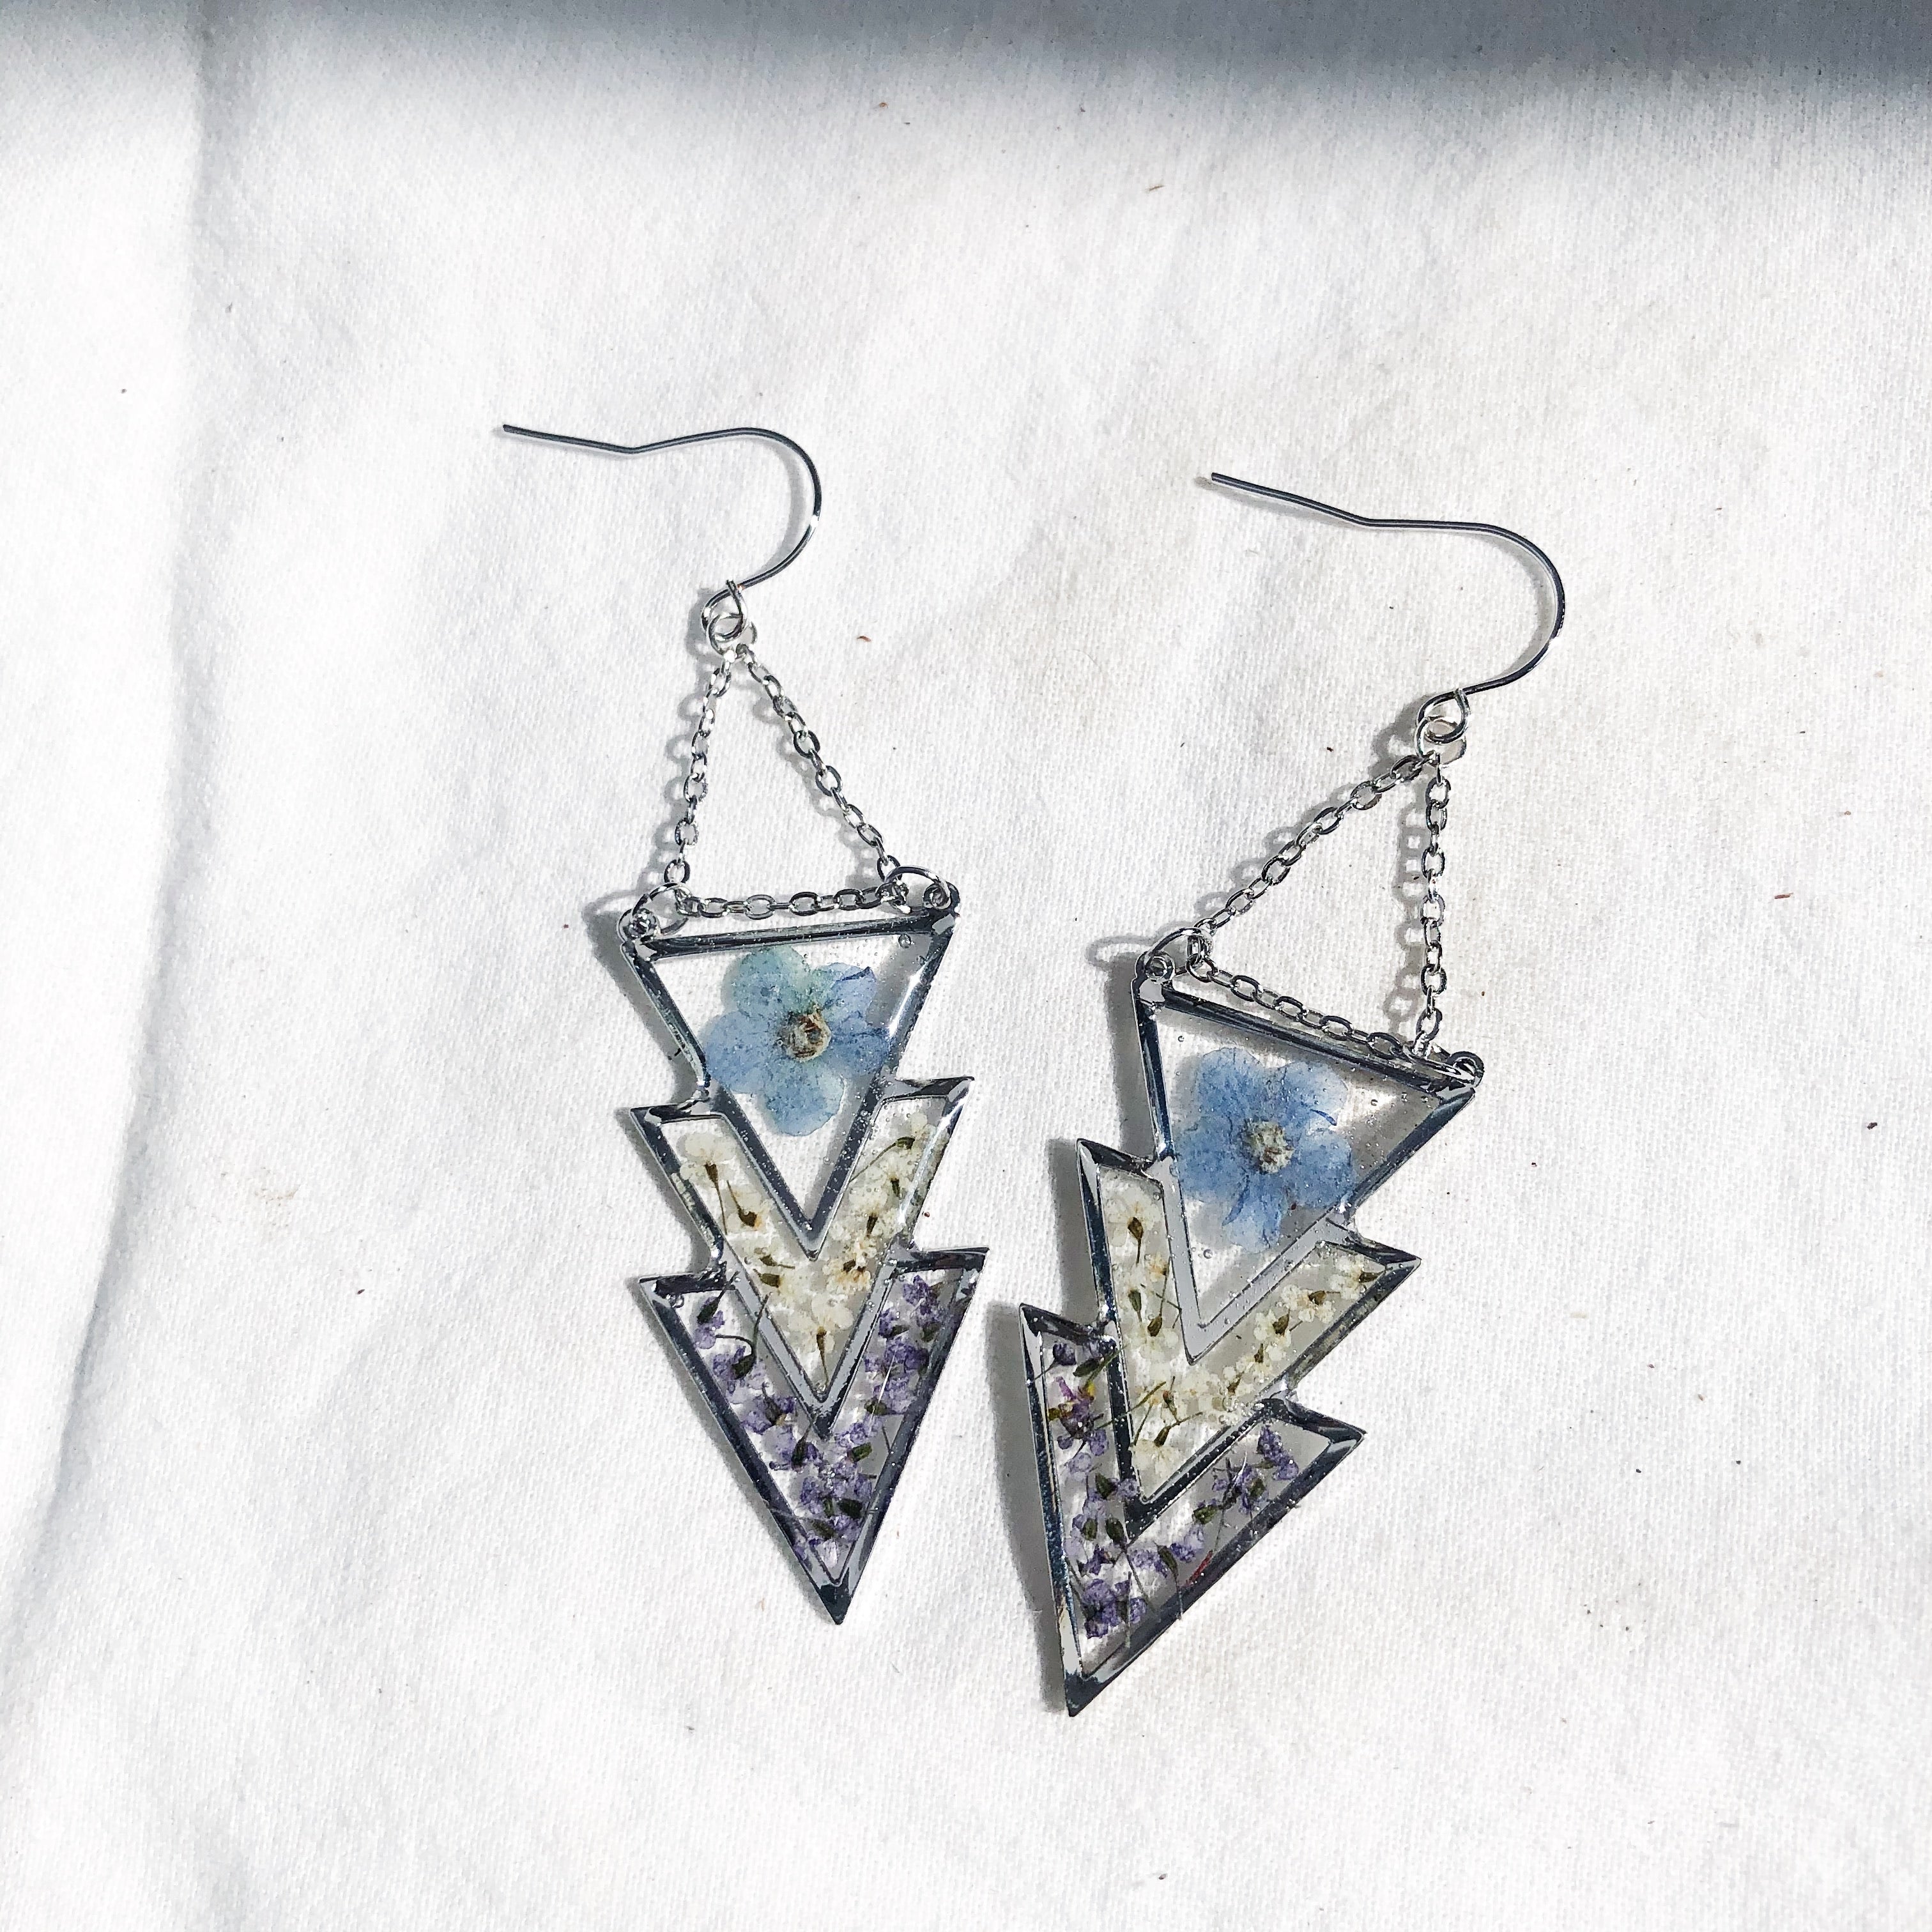 Reyna - Silver Triangle Chain Earrings with Pressed Flowers